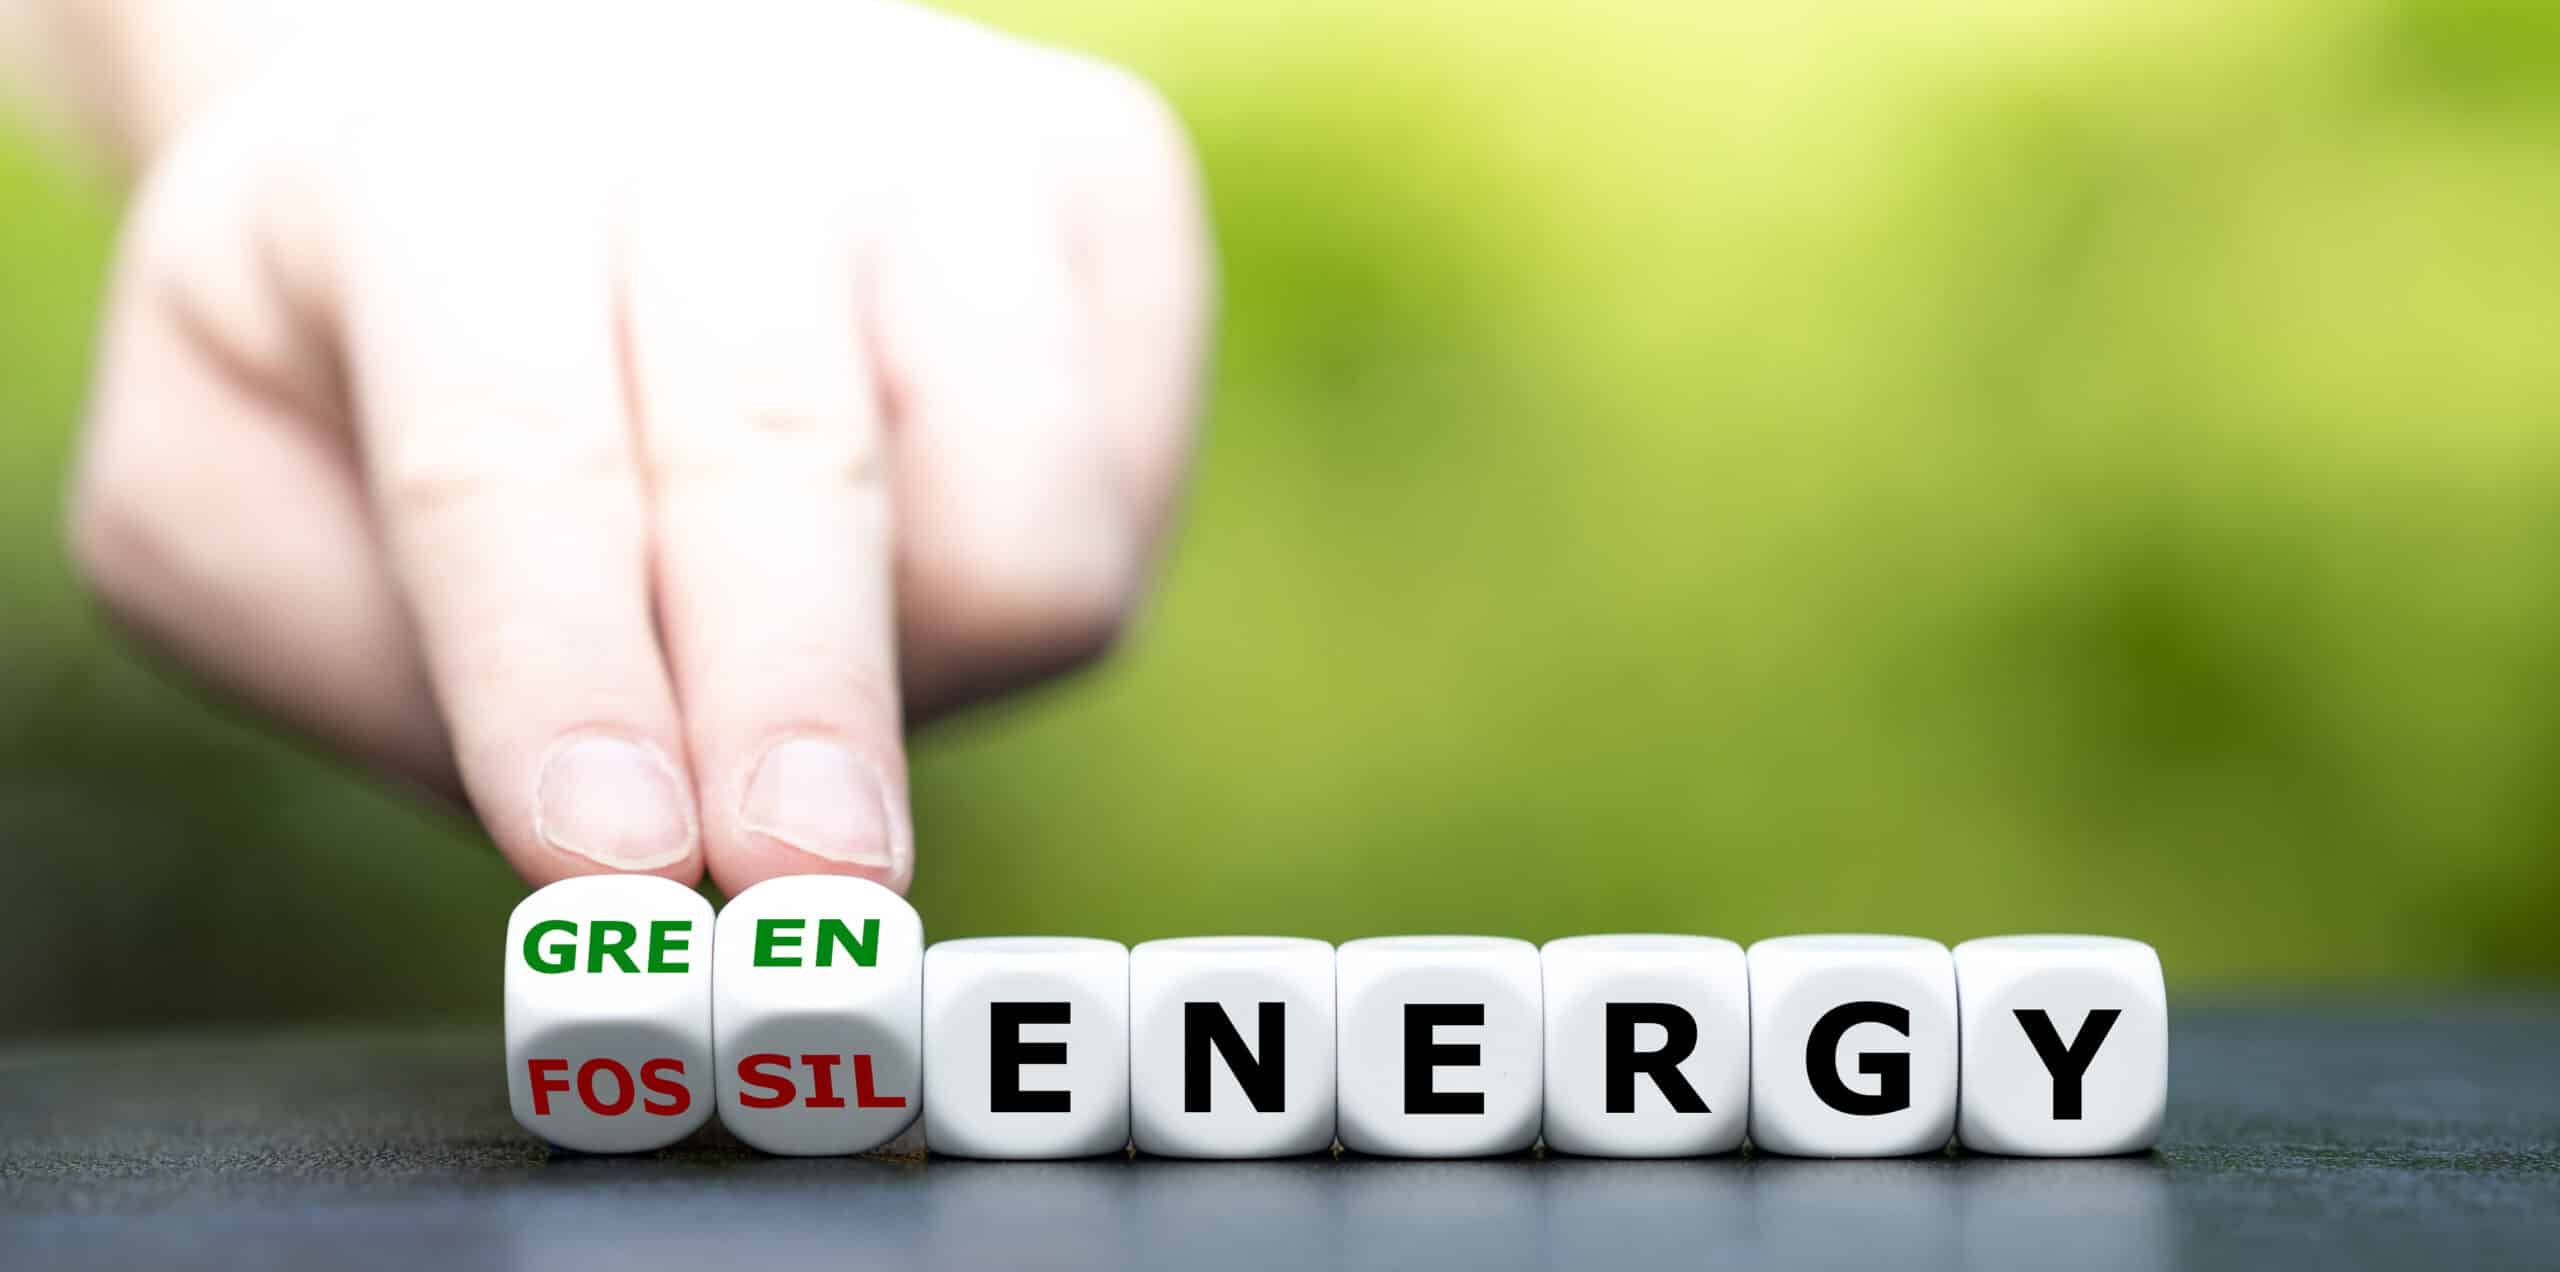 4 Ways to Communicate the Just Energy Transition